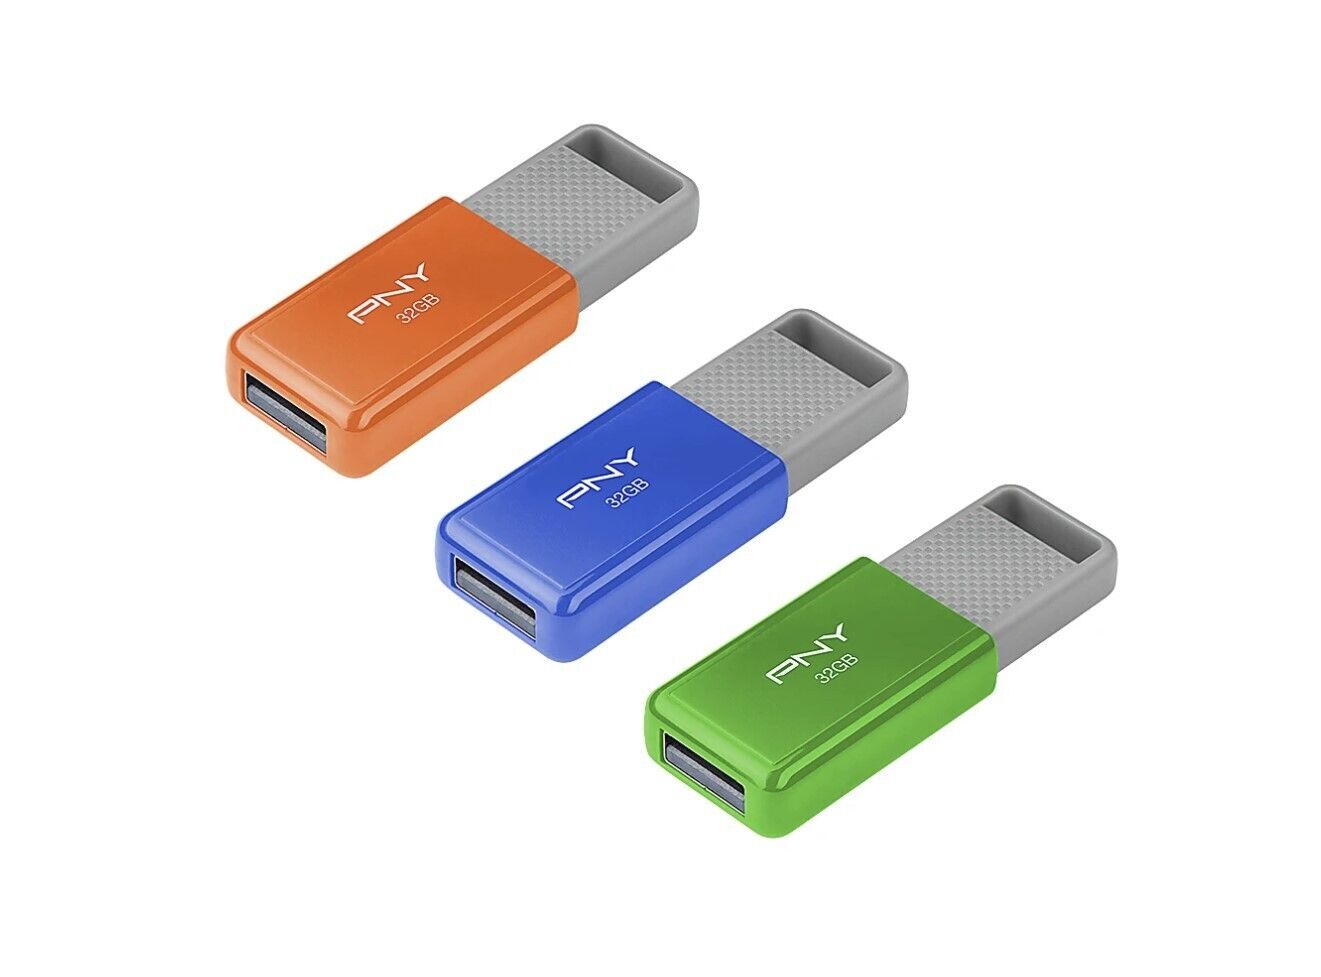 PNY USB 2.0 Flash Drives, 32GB, Assorted Colors, Pack Of 3 Drives - Ricky's Garage